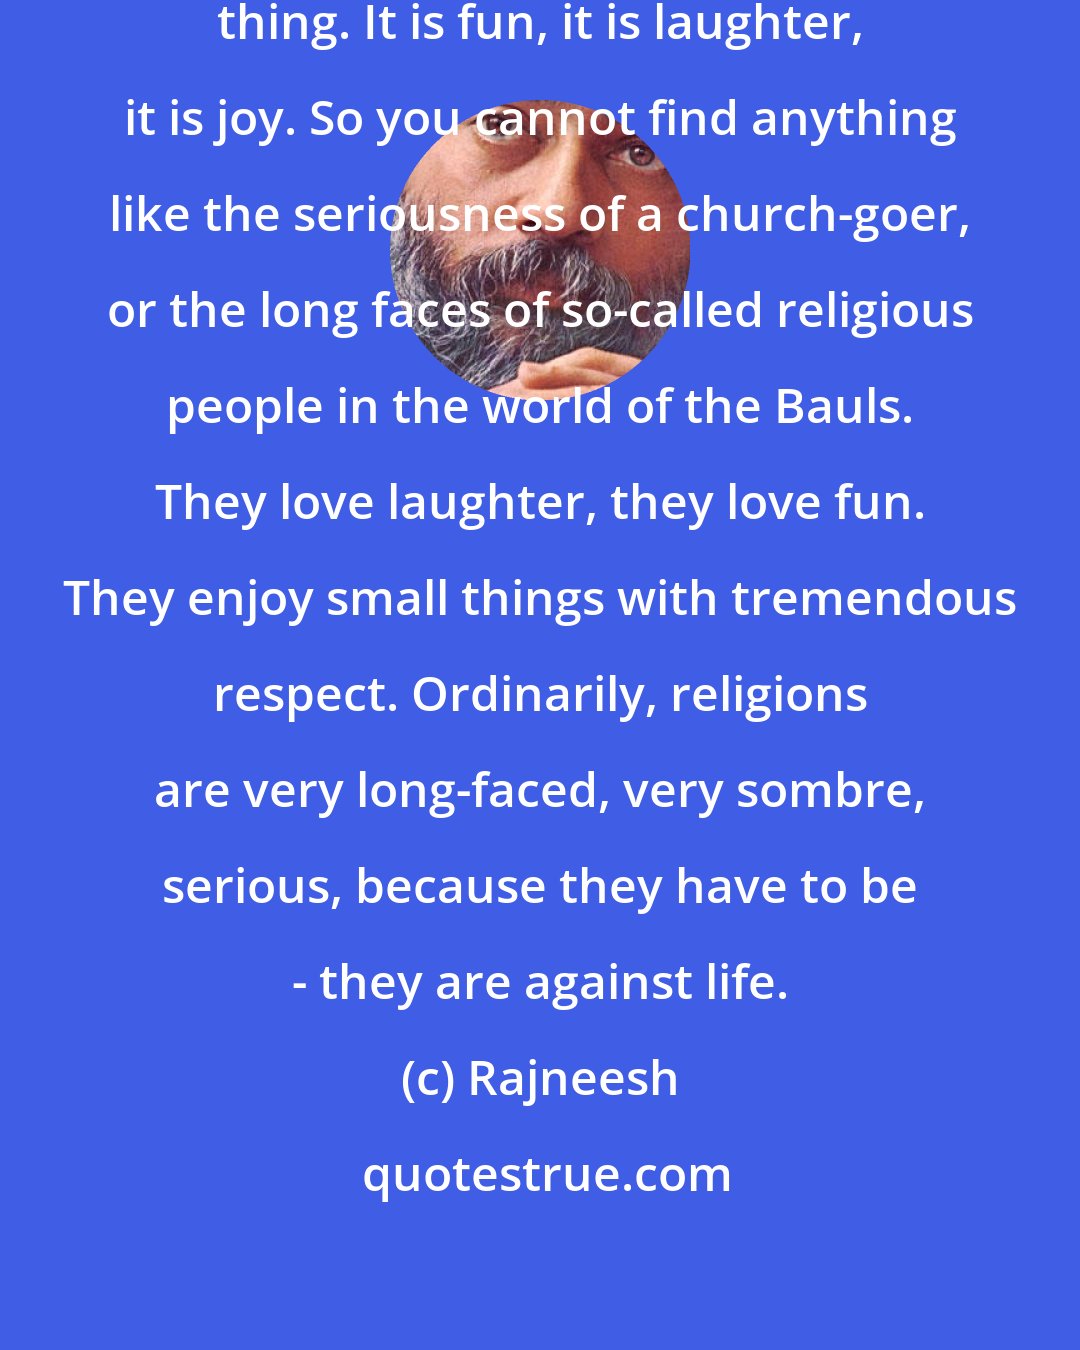 Rajneesh: For the Baul, life is not a serious thing. It is fun, it is laughter, it is joy. So you cannot find anything like the seriousness of a church-goer, or the long faces of so-called religious people in the world of the Bauls. They love laughter, they love fun. They enjoy small things with tremendous respect. Ordinarily, religions are very long-faced, very sombre, serious, because they have to be - they are against life.